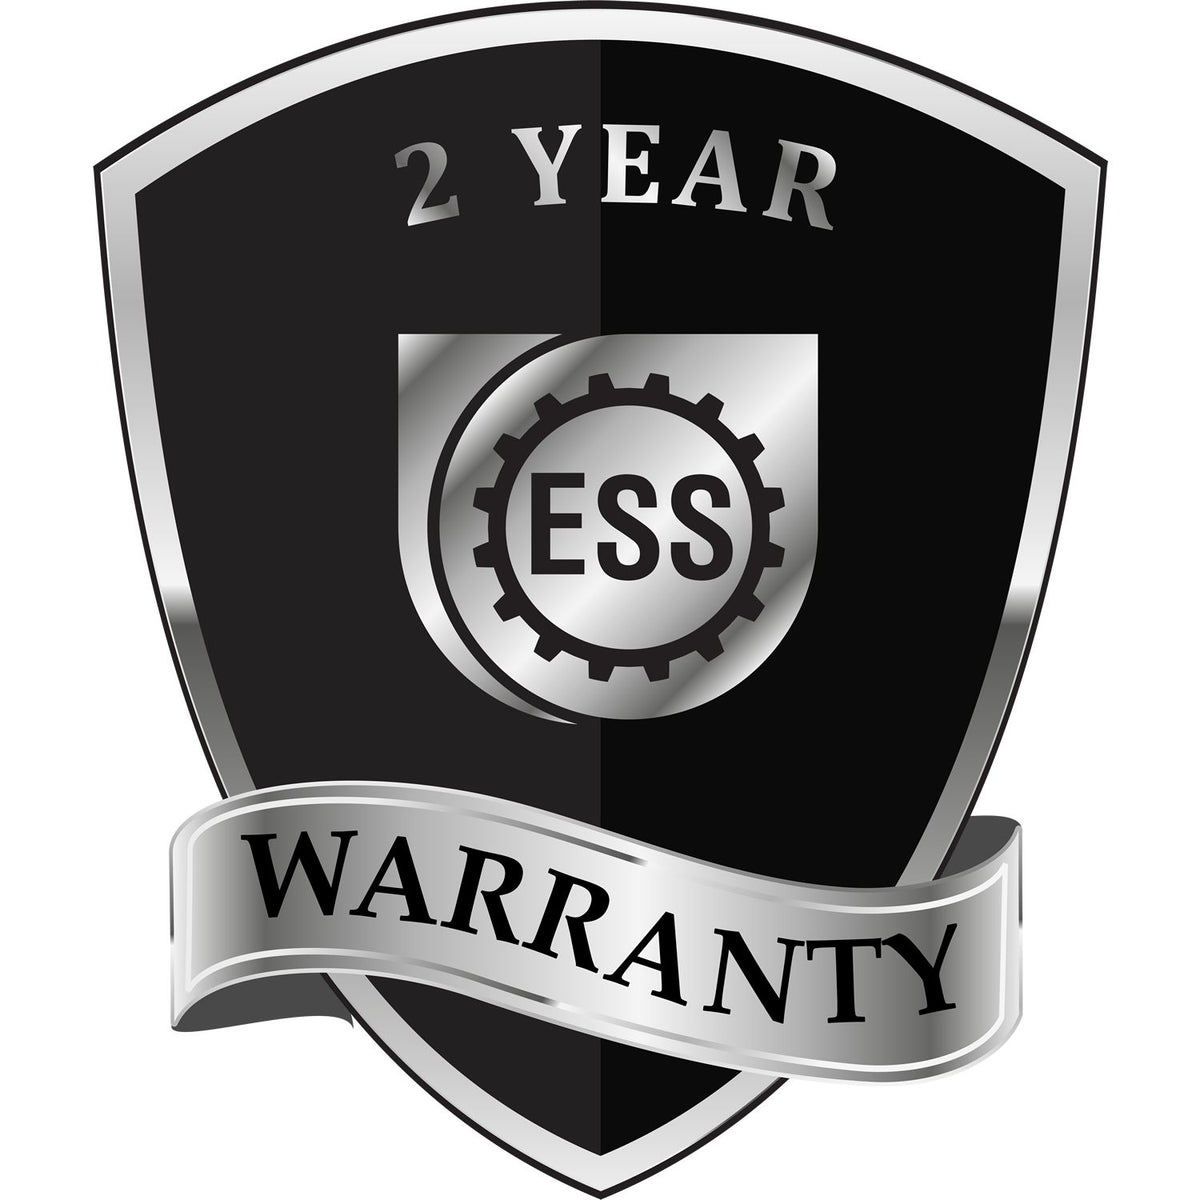 A black and silver badge or emblem showing warranty information for the Hybrid Pennsylvania Geologist Seal